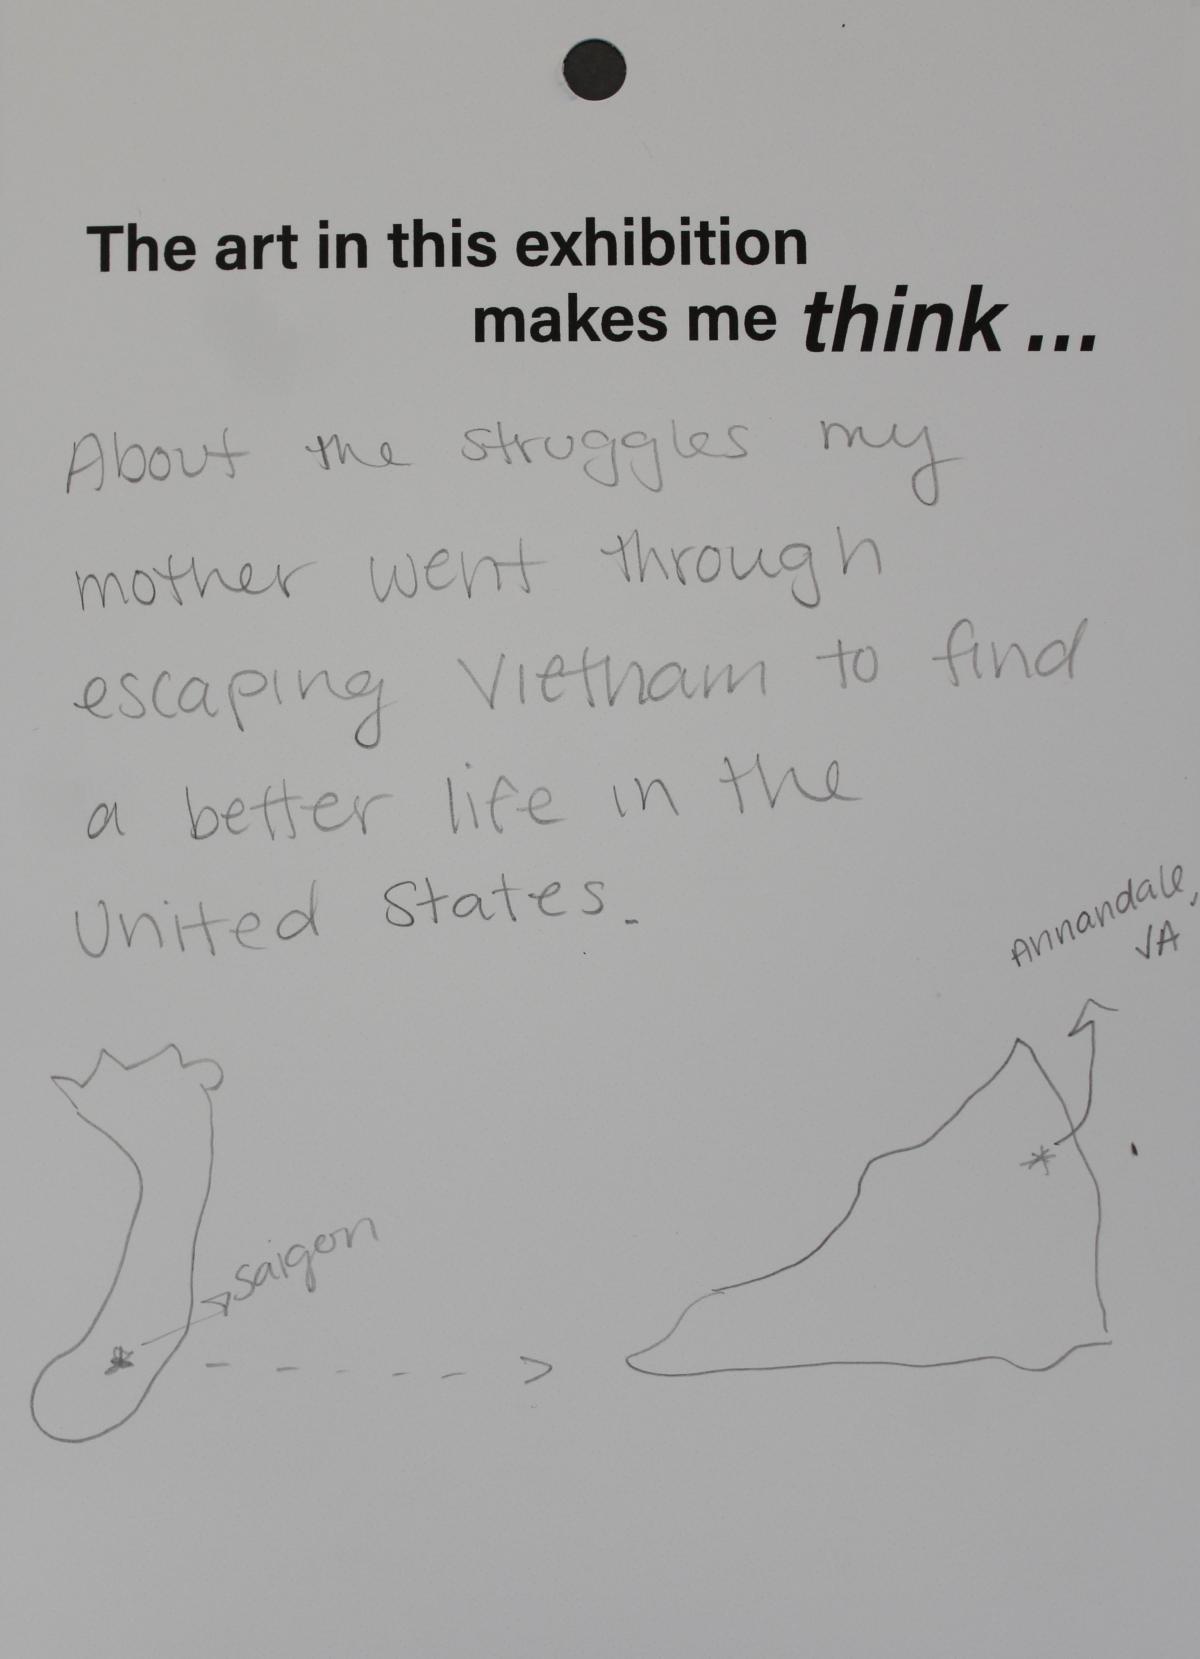 A visitor creates a map linking Vietnam and the US as his mother was a refugee